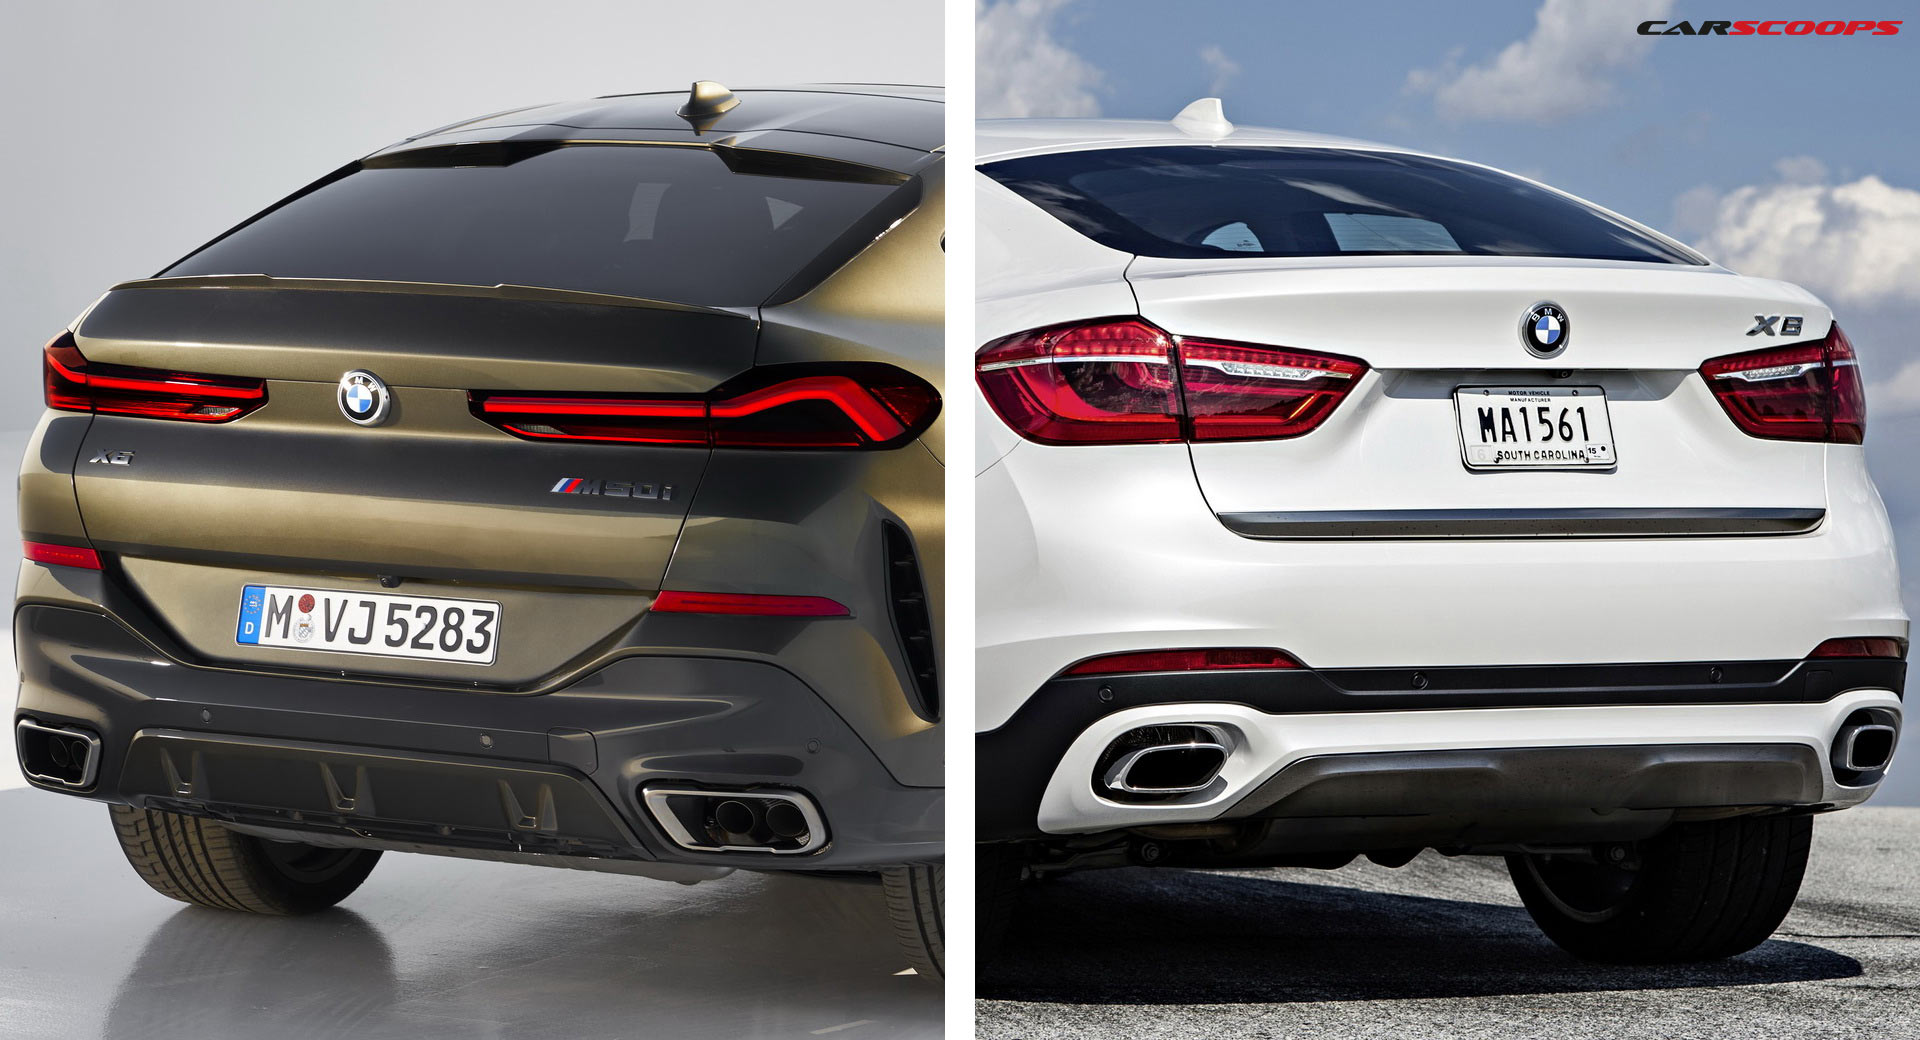 2020 BMW X6 Versus Its Predecessor: Should You Want To Upgrade?